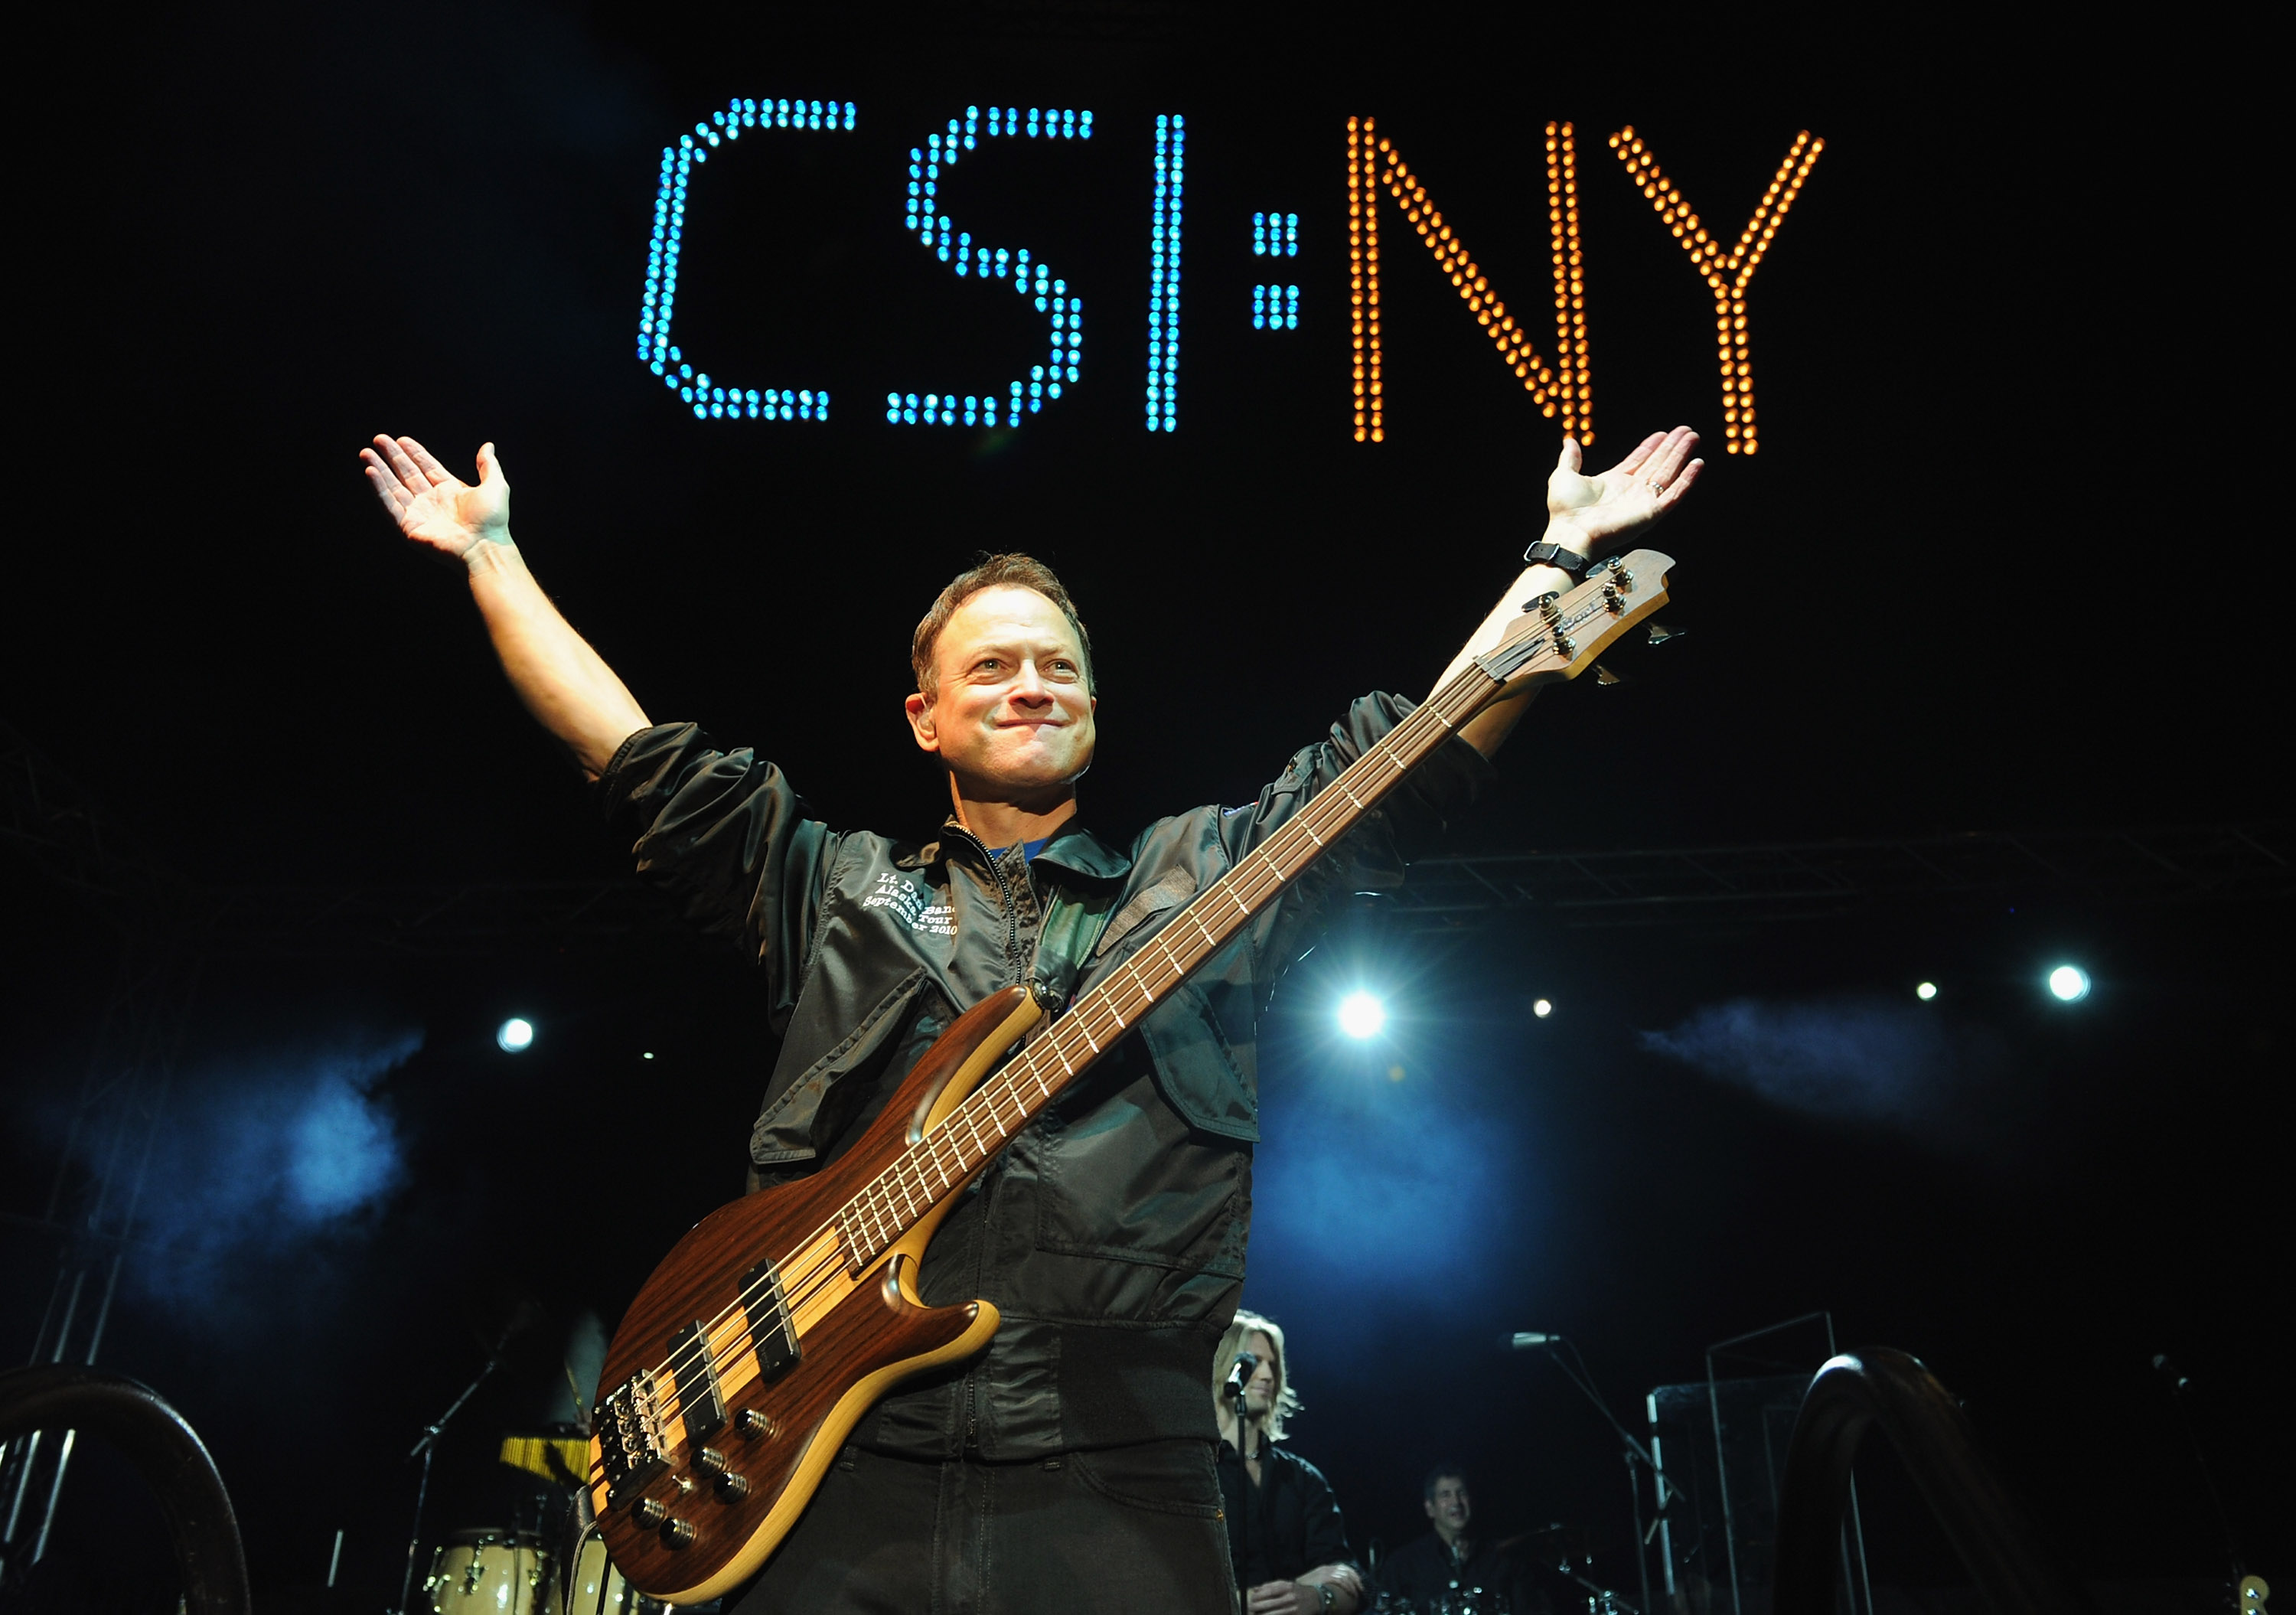 Gary Sinise and the Lt. Band. Dan performs at the 6th annual "CSI: NY" midseason party in Studio City, California, on October 29, 2010. | Source: Getty Images